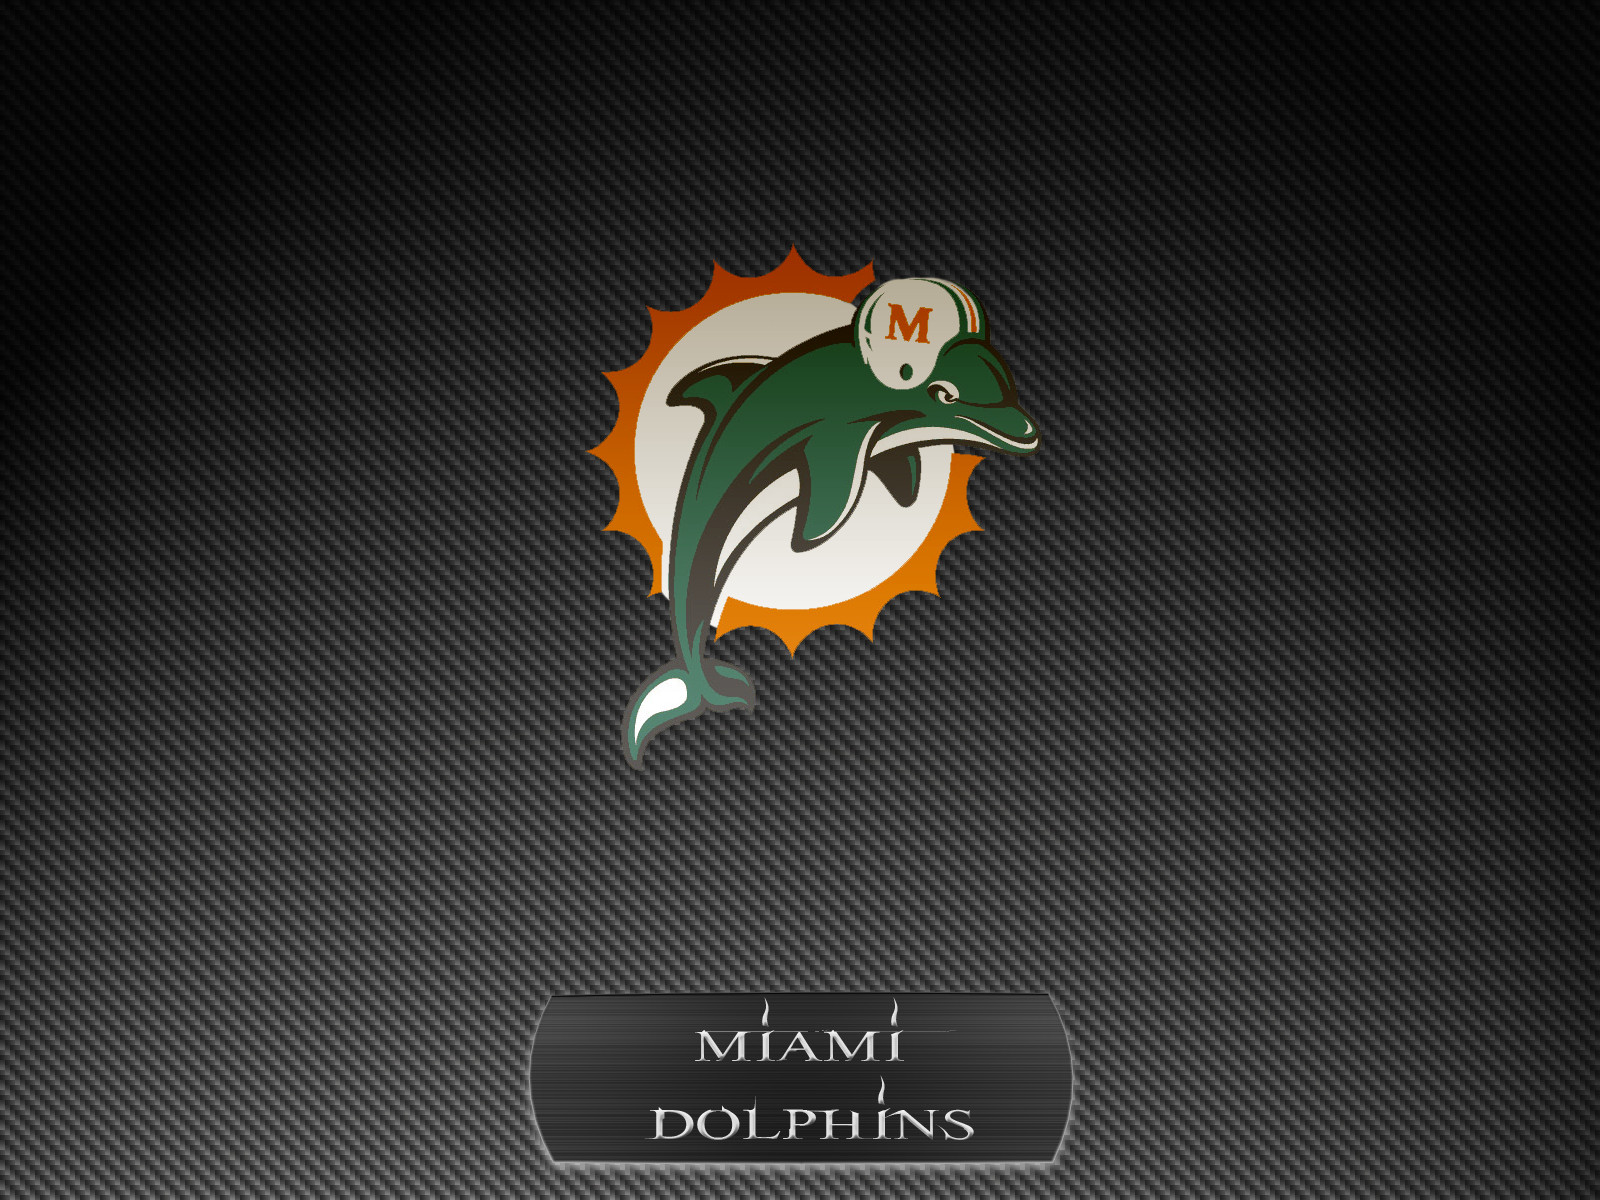 You Like Miami Dolphins Wallpaper Surely Ll Love This